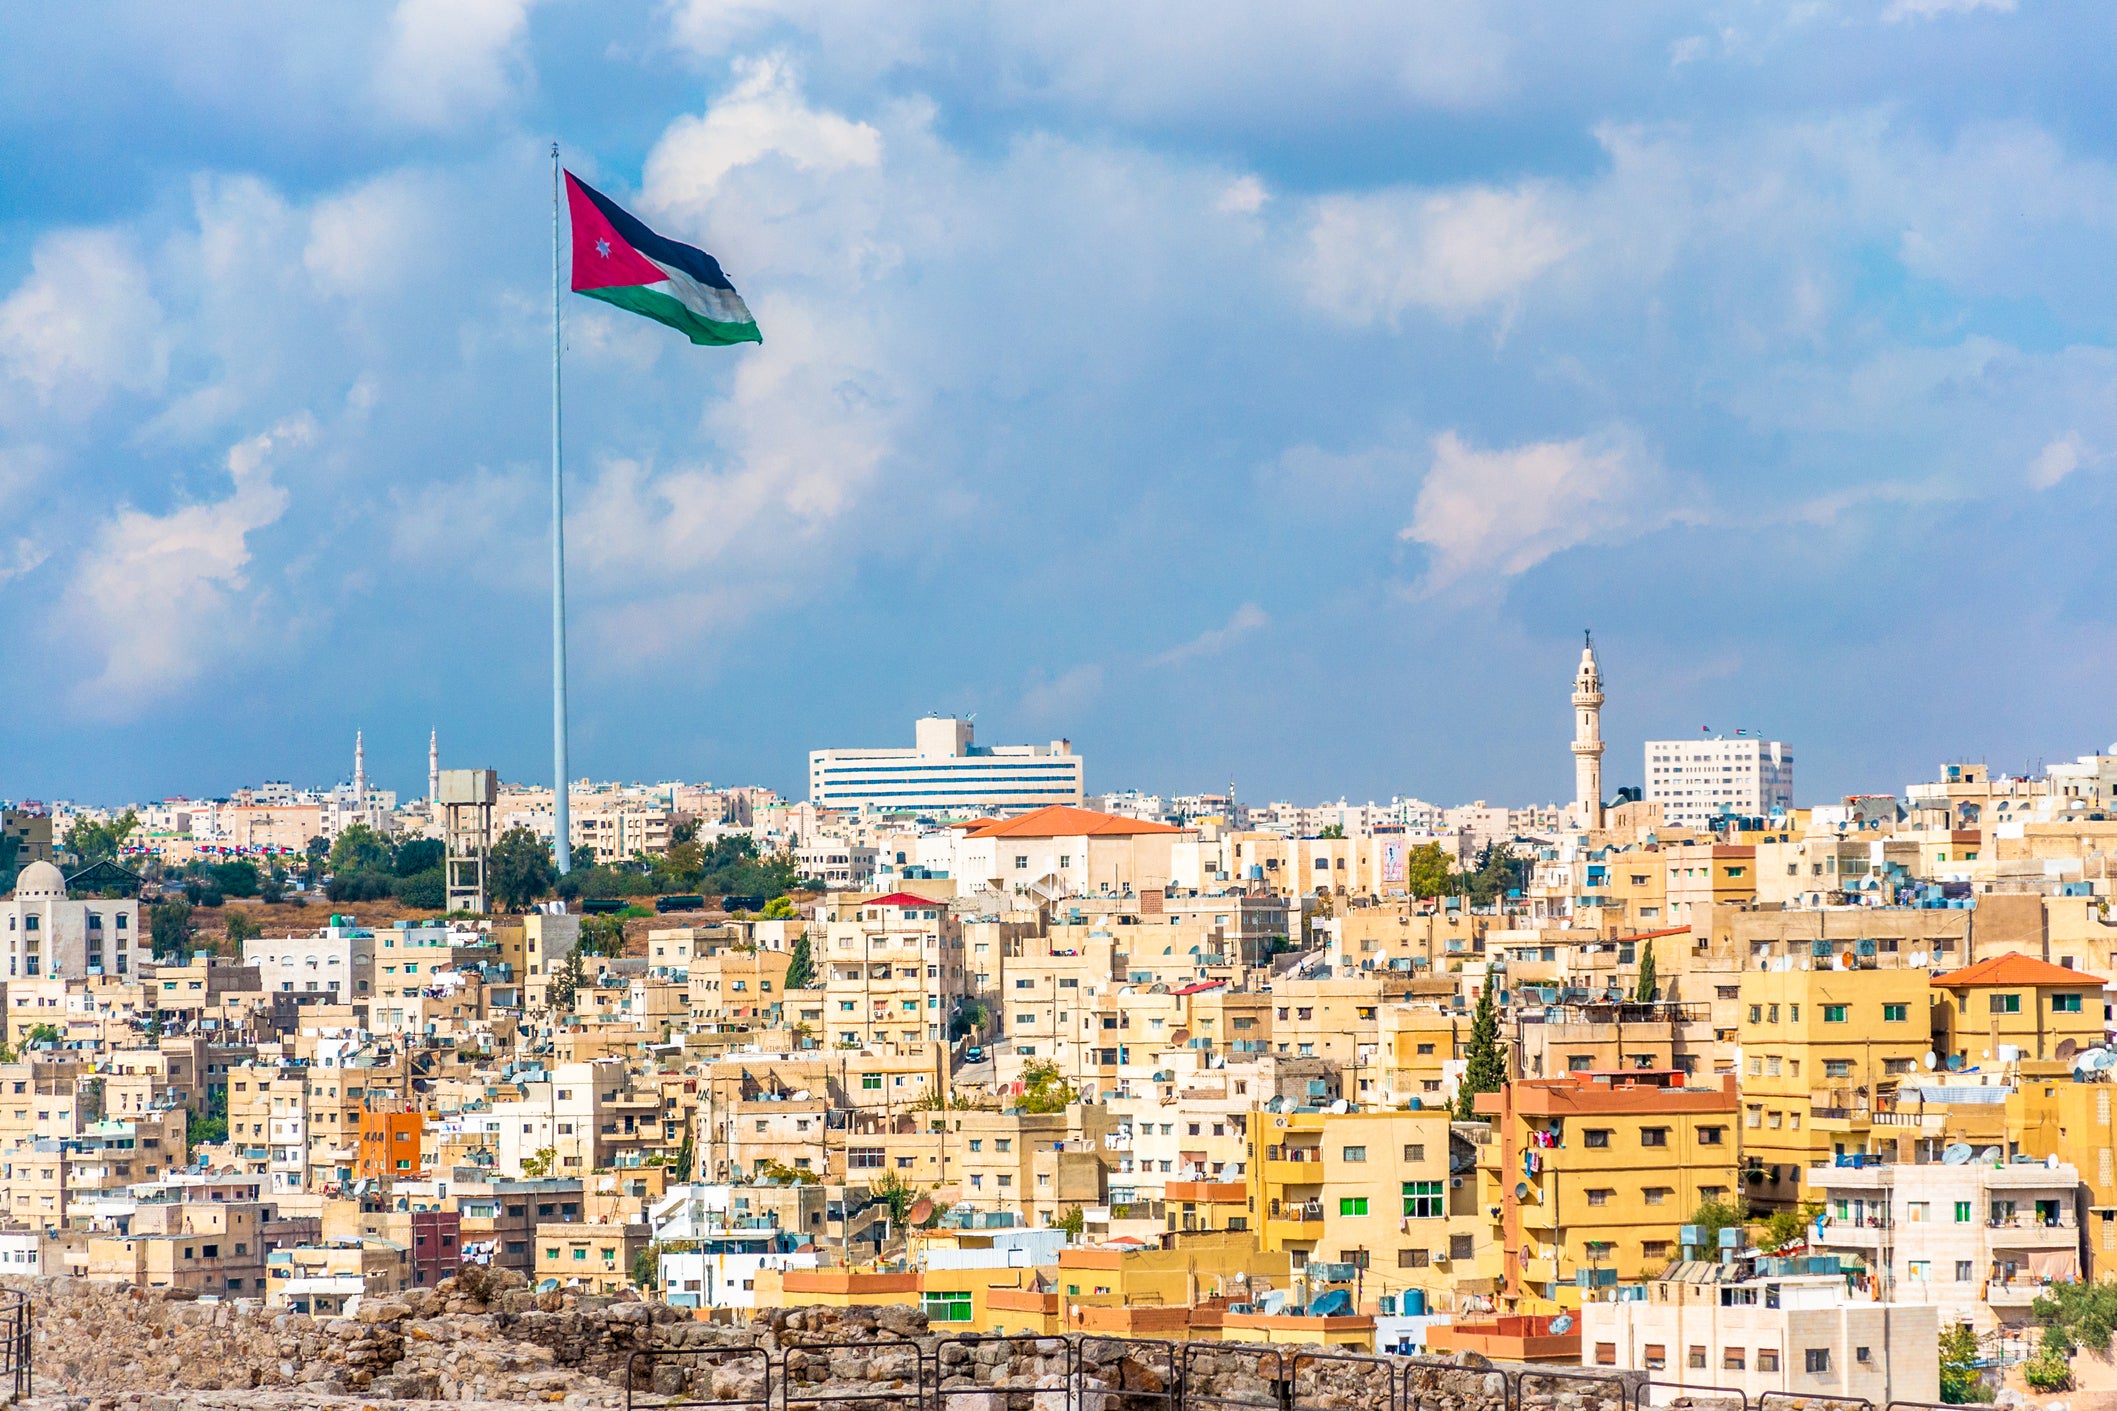 Amman is a busy, vibrant and ever-changing city